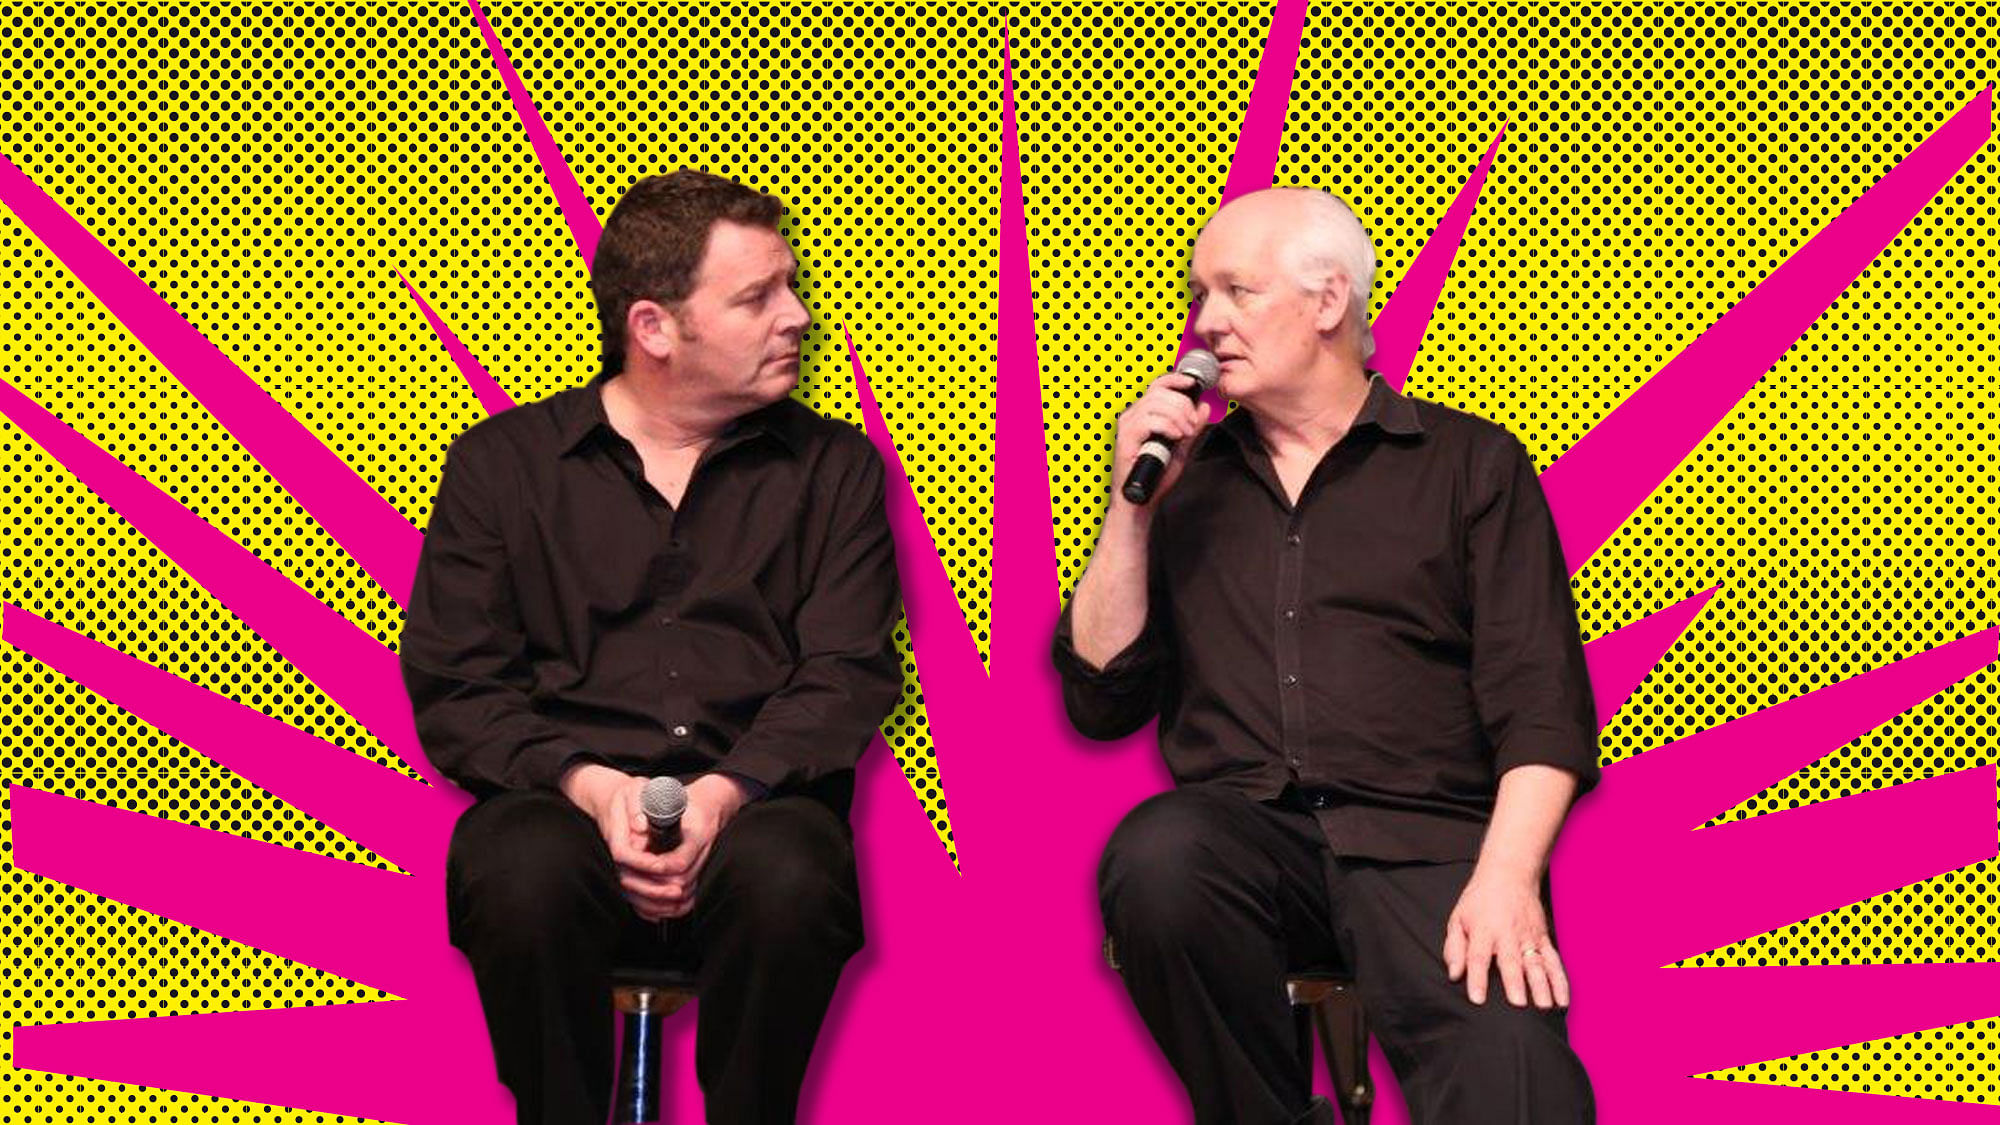 Brad (left) and Colin (right) perform in India for the second time. (Image altered by <b>The Quint</b>)